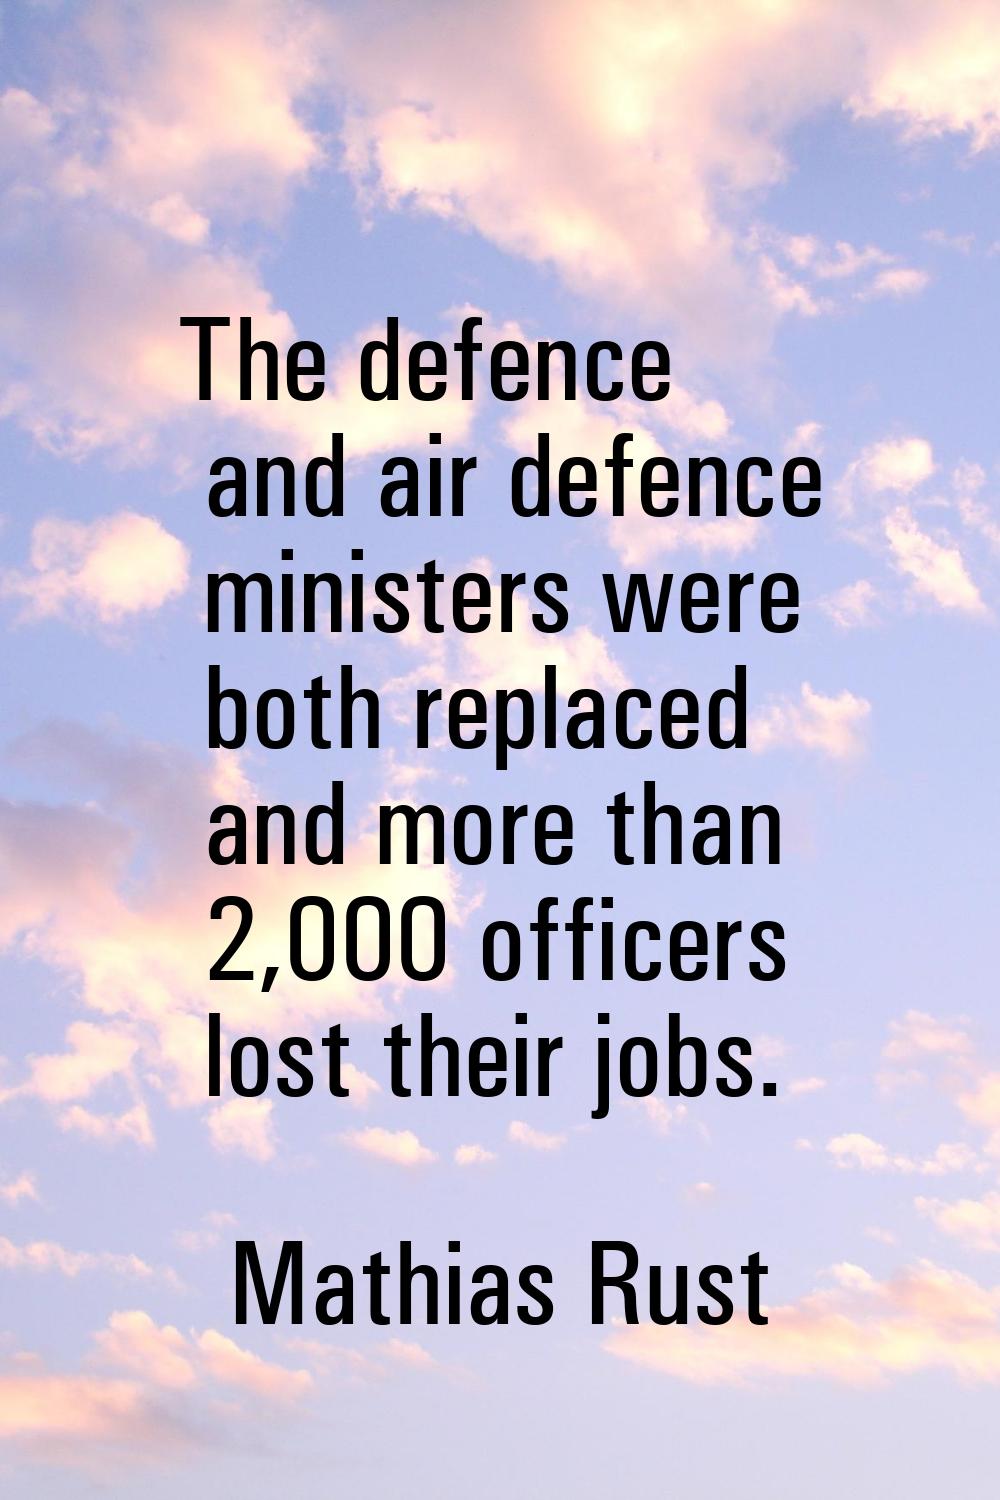 The defence and air defence ministers were both replaced and more than 2,000 officers lost their jo